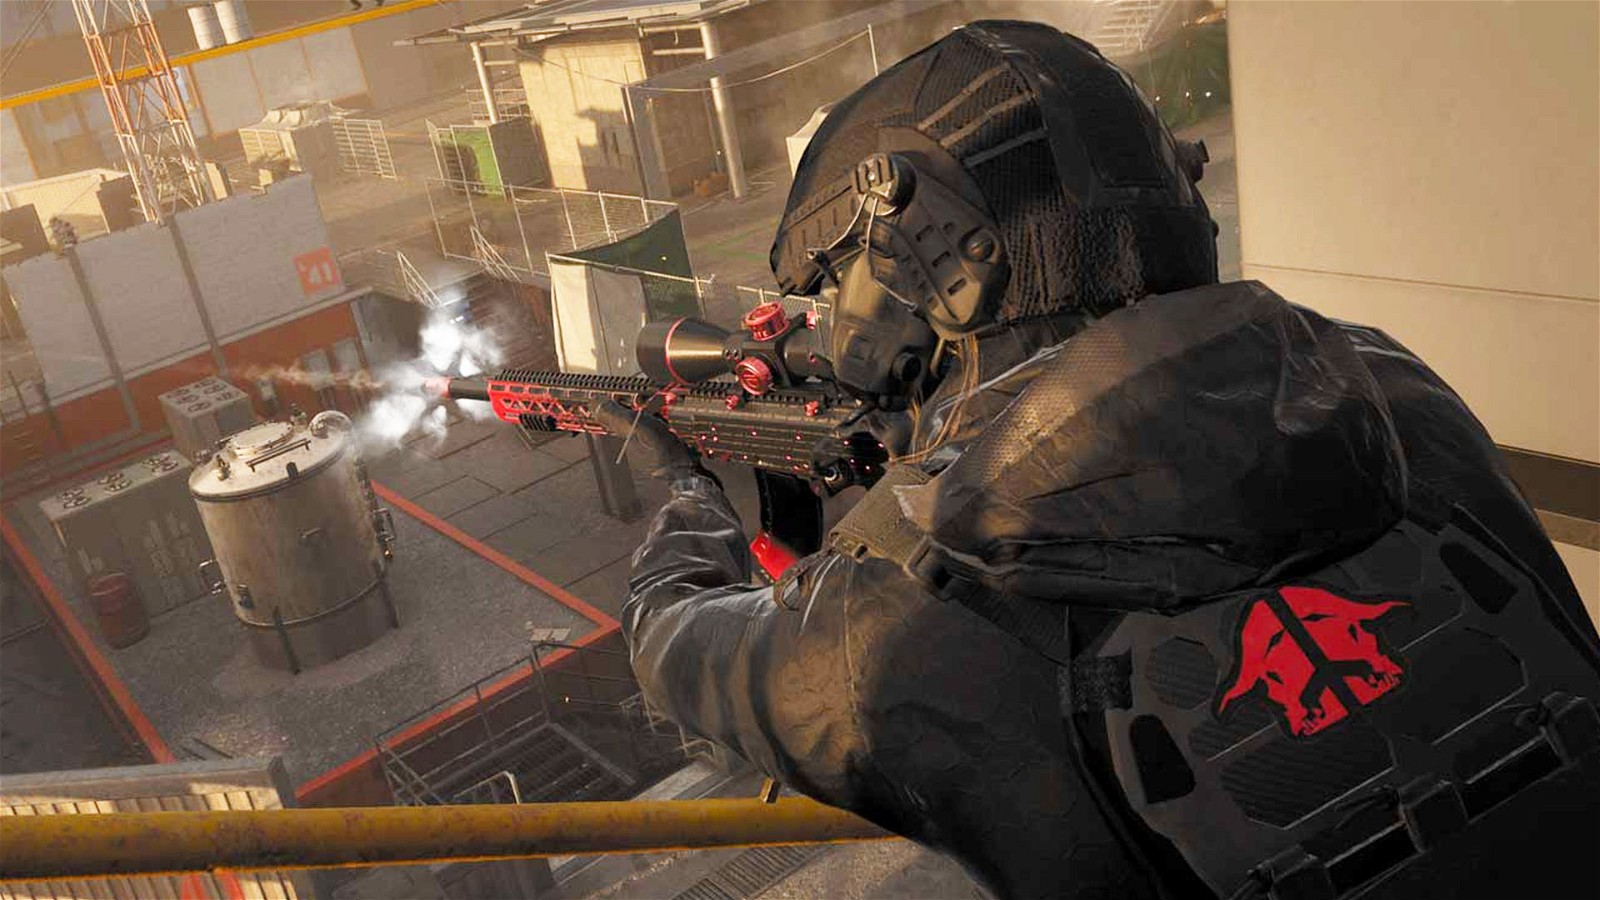 The director revealed he has never given it much thought when it comes to work on Call of Duty.